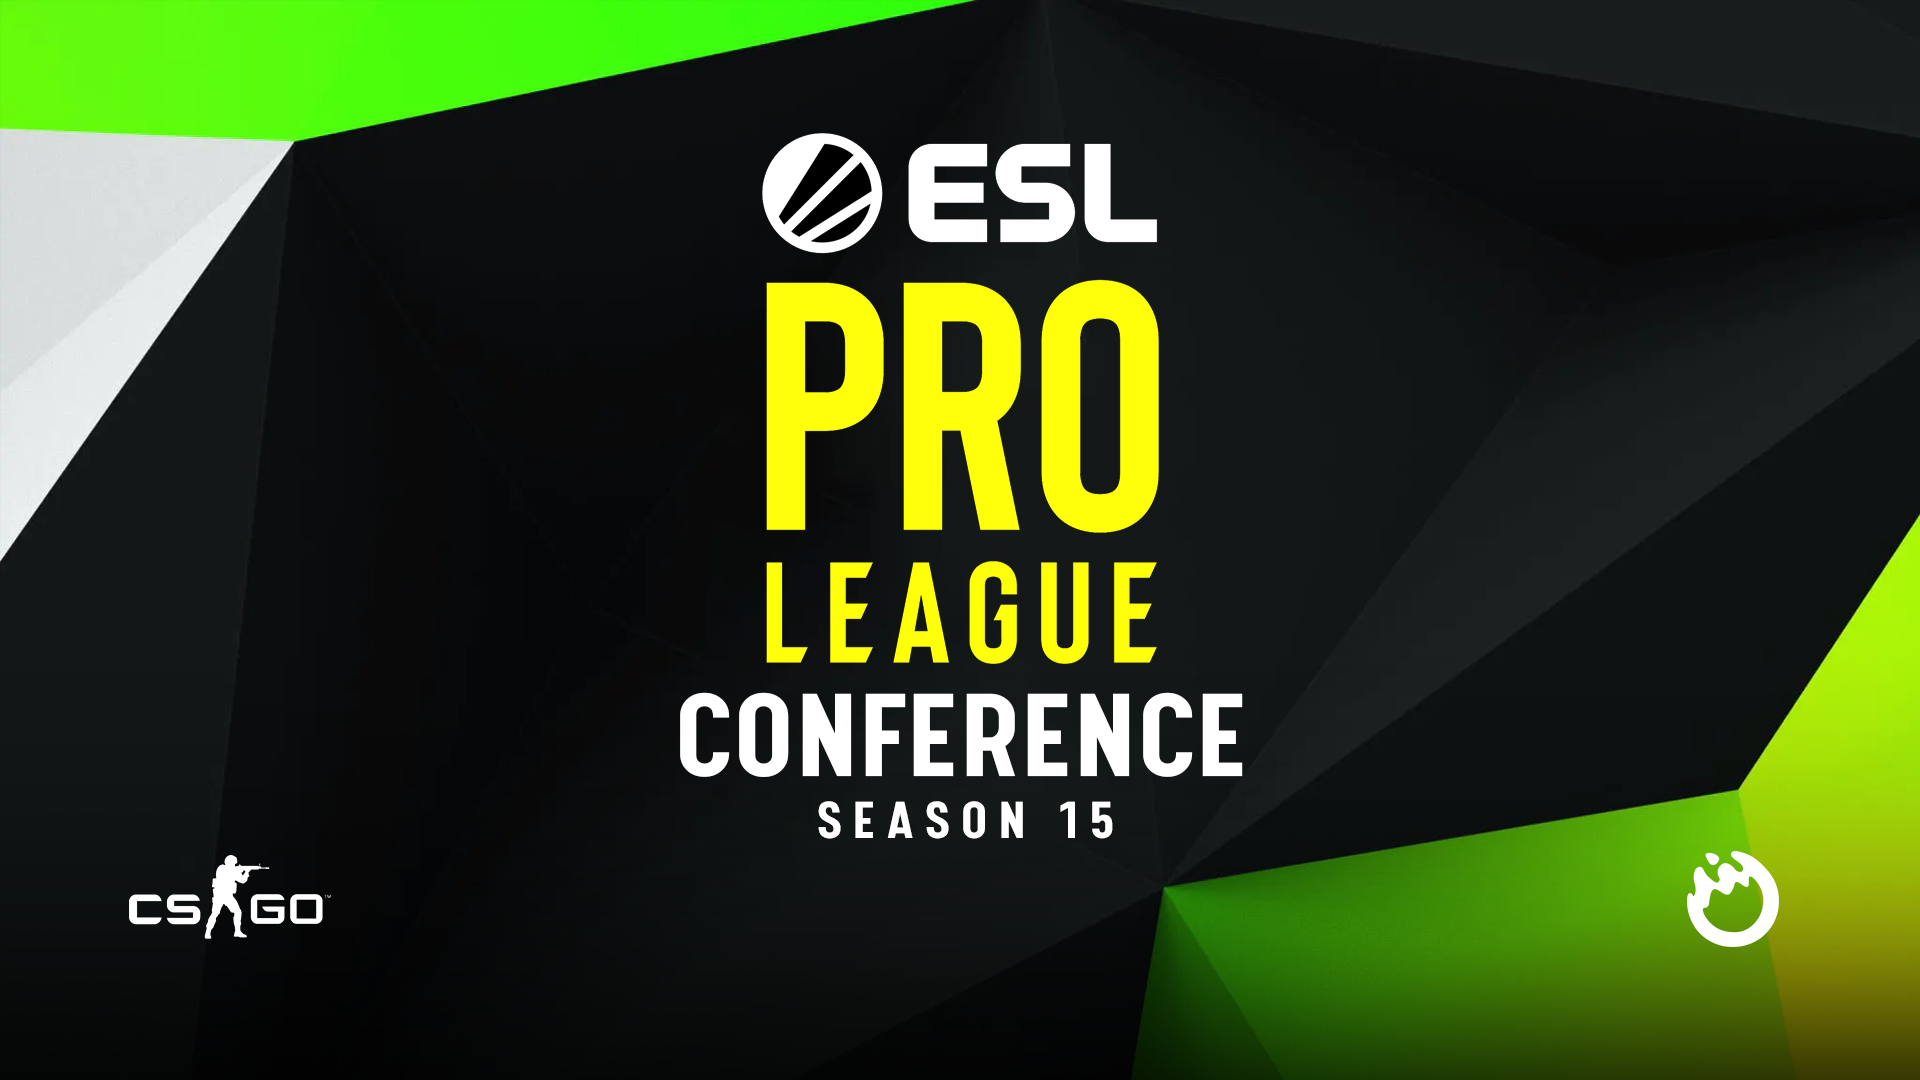 ESL Pro League S15 Conference: Extra Salt secure Pro League group stage spot with win over MAD Lions